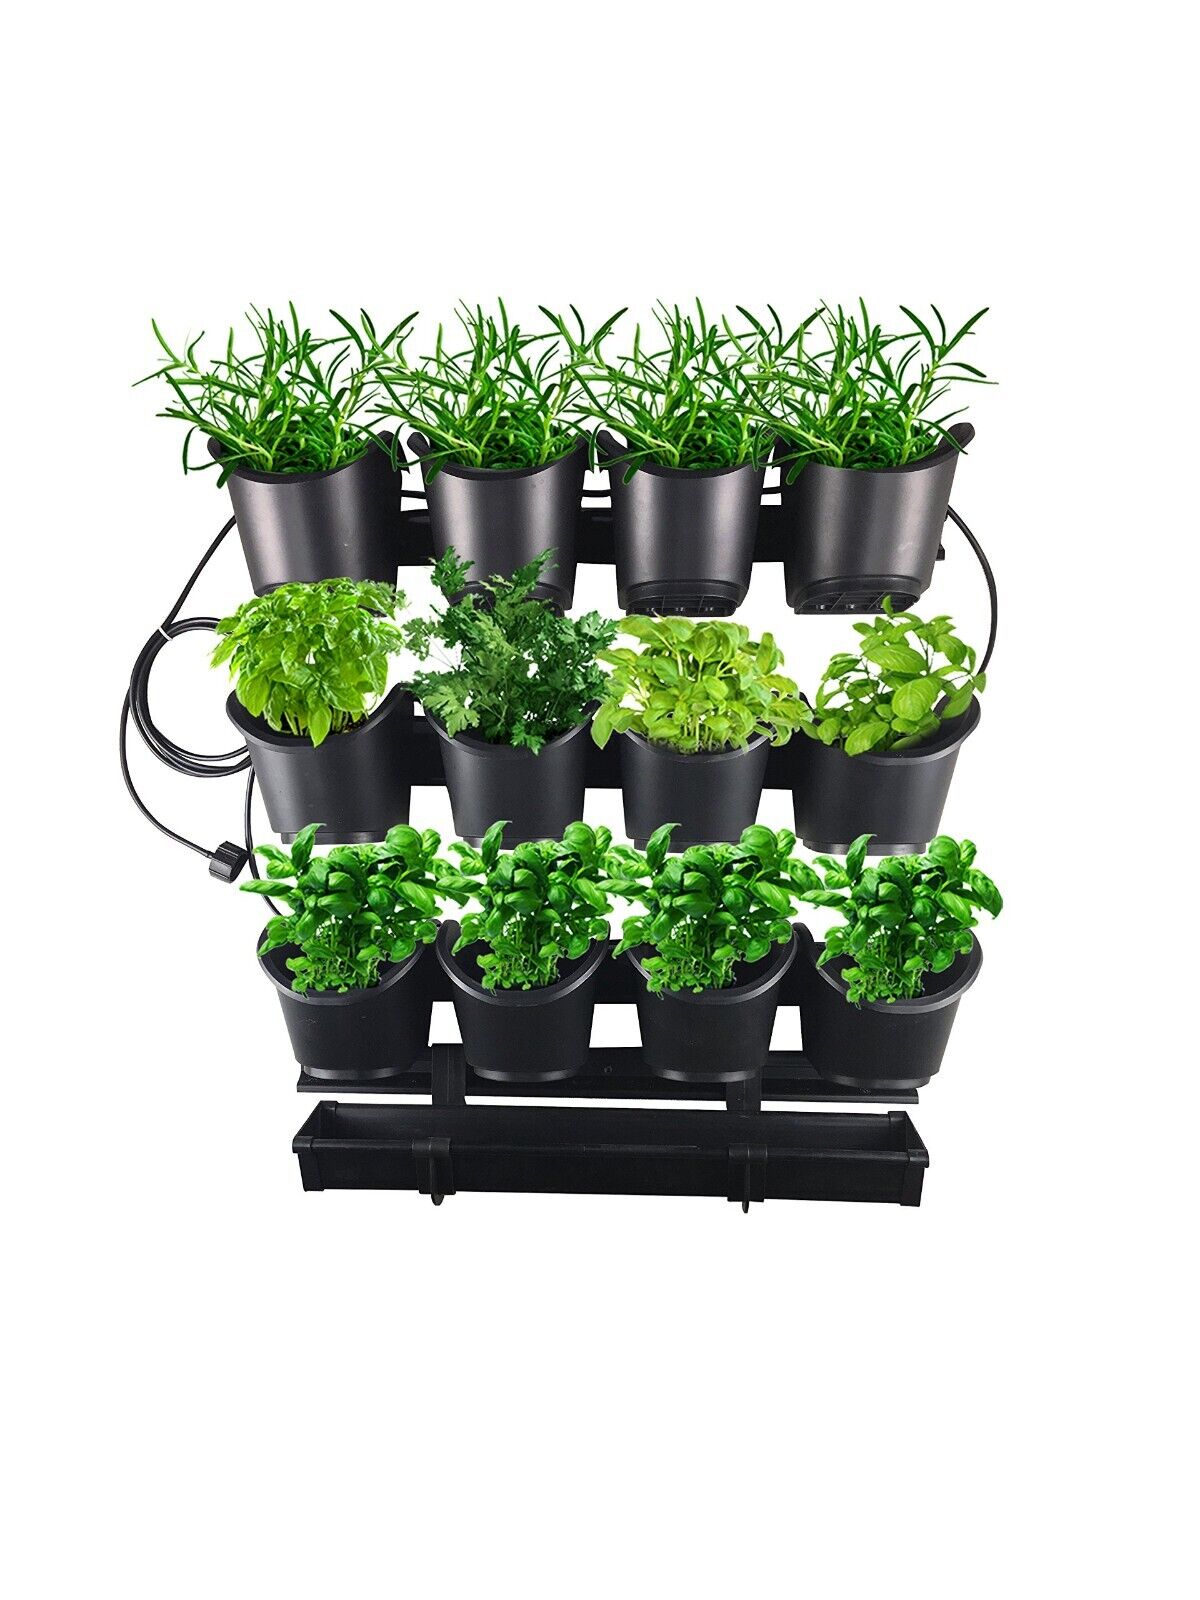 🌹Watex Urban Farming Herb & Flower Kit with Micro Irrigation System WX042 NEW